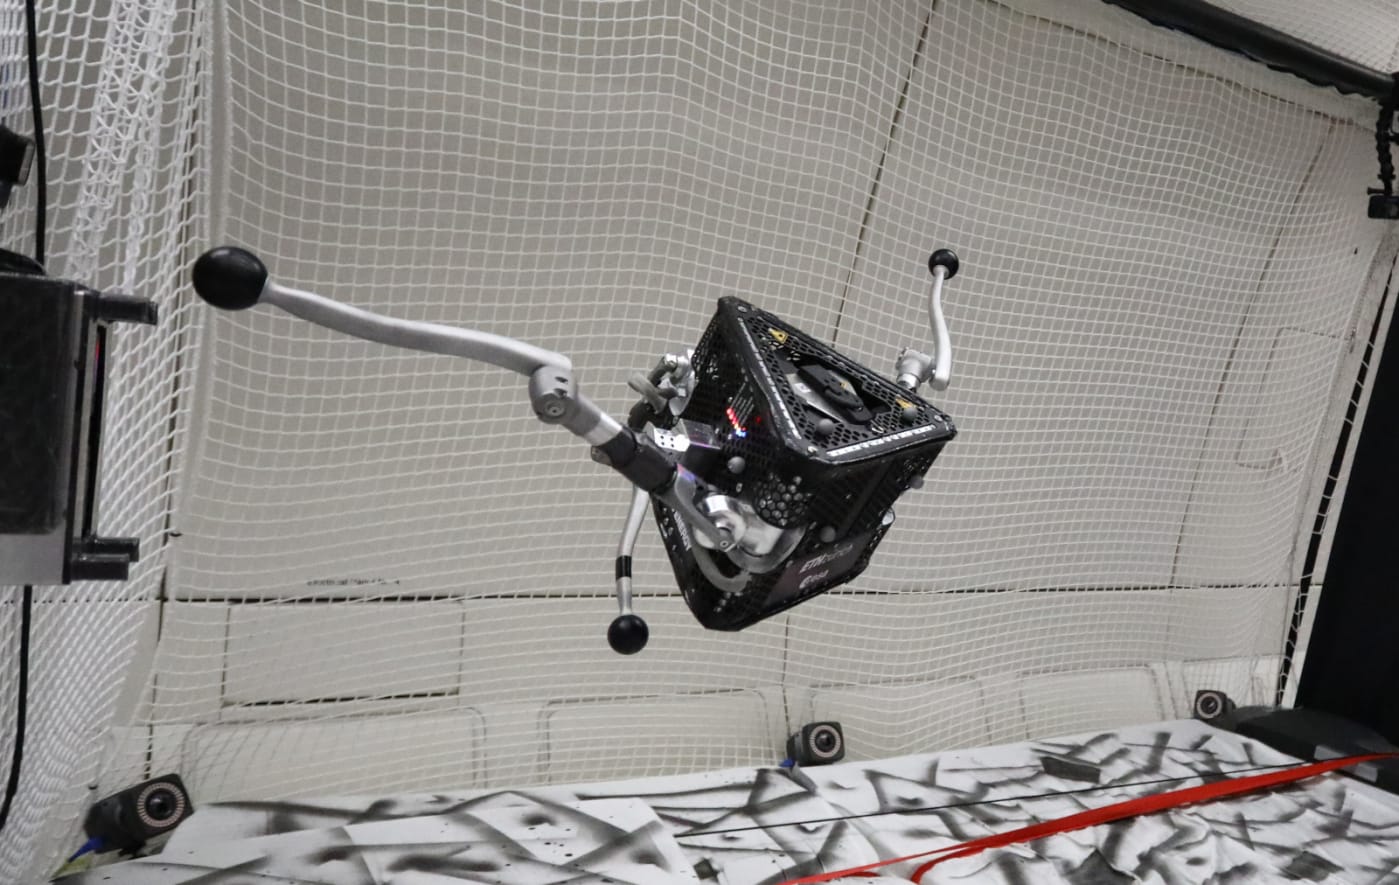 This hopping robot with flailing legs could explore asteroids in the future